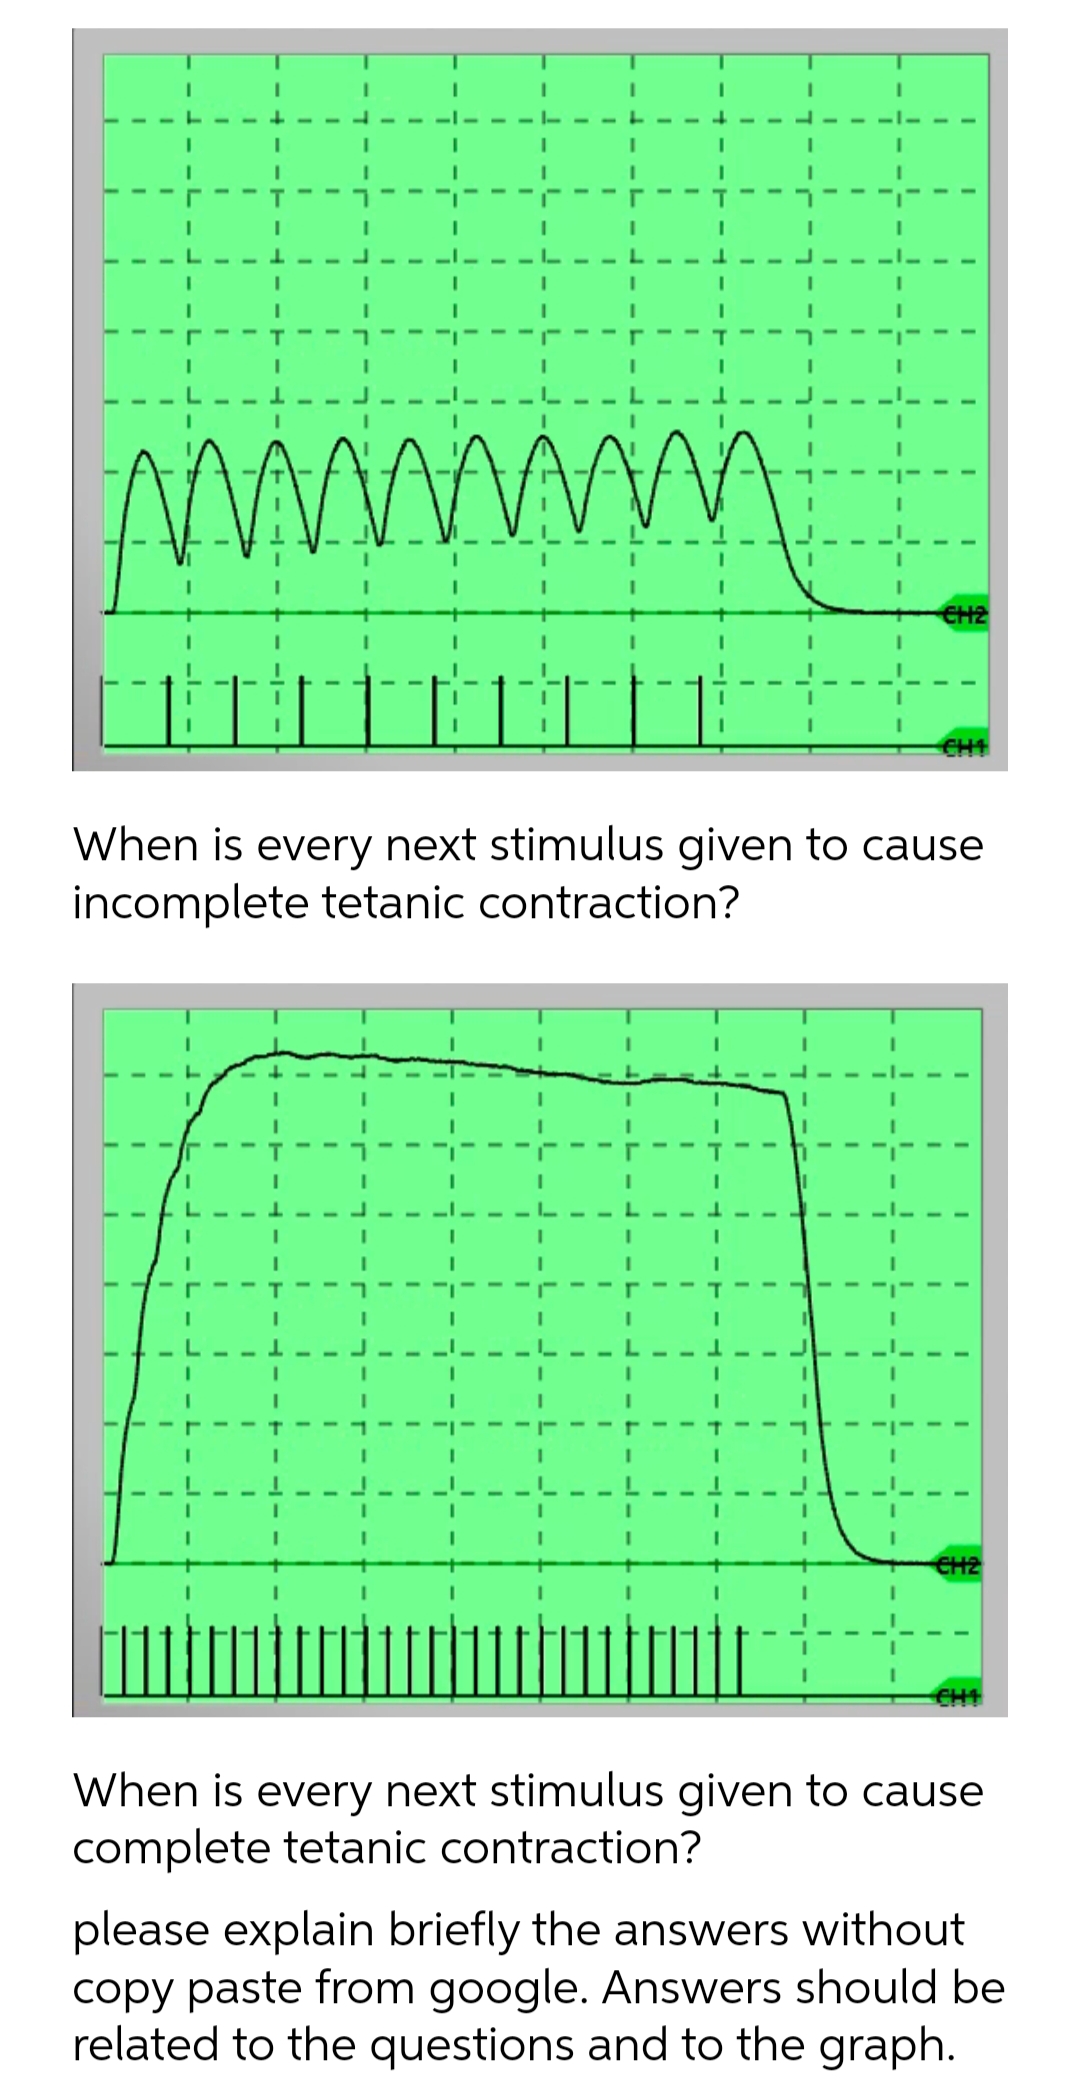 www
CH2
CH1
When is every next stimulus given to cause
incomplete tetanic contraction?
CH2
CHI
When is every next stimulus given to cause
complete tetanic contraction?
please explain briefly the answers without
copy paste from google. Answers should be
related to the questions and to the graph.
